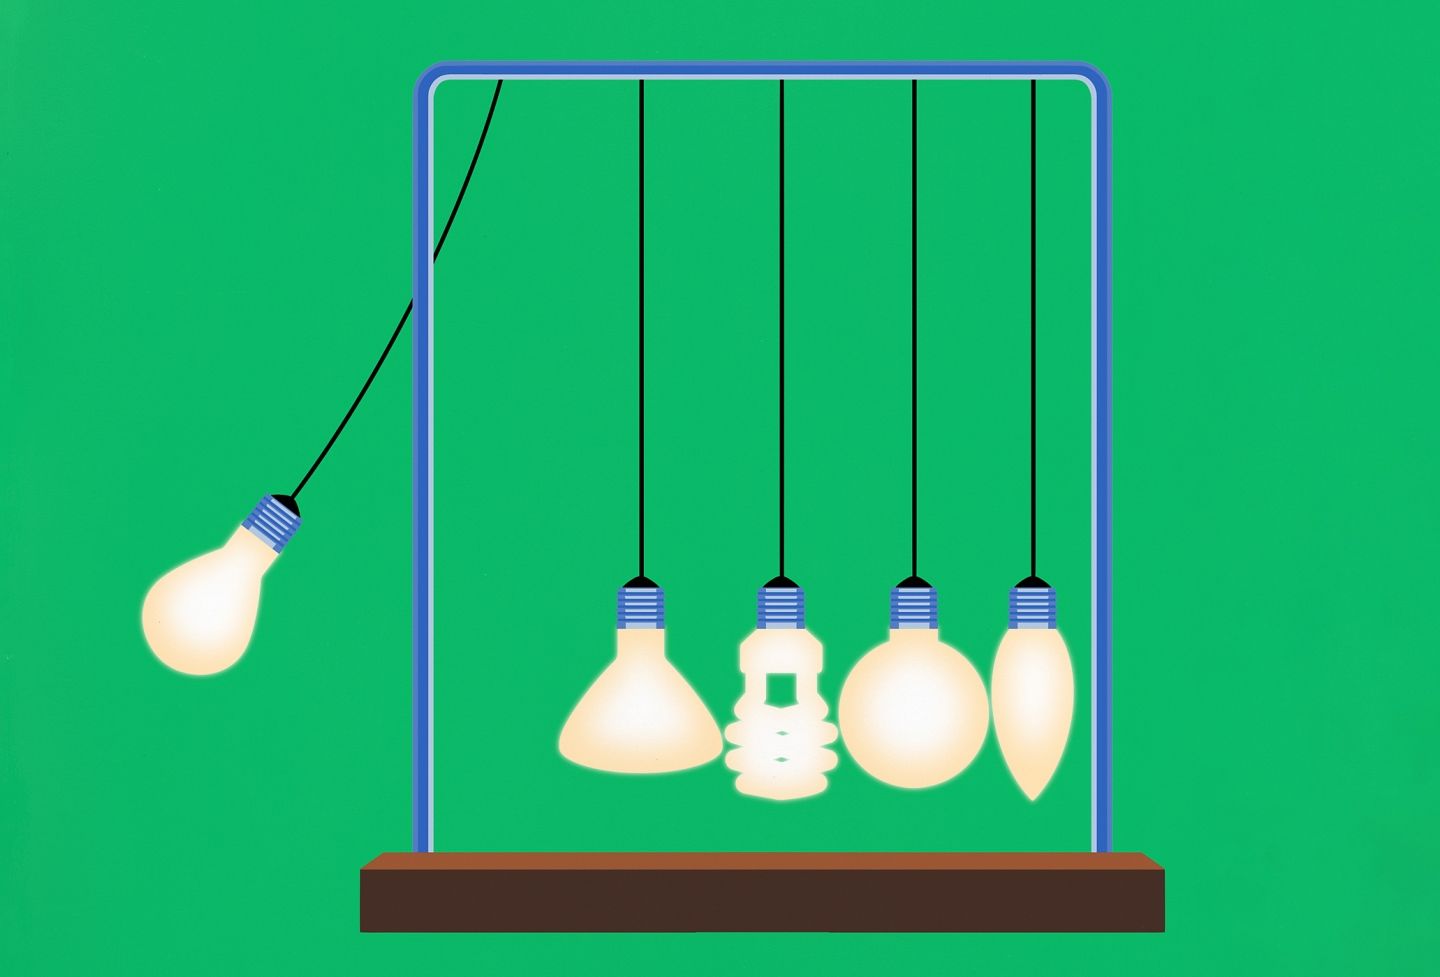 Illustration of light bulbs in a perpetual motion machine